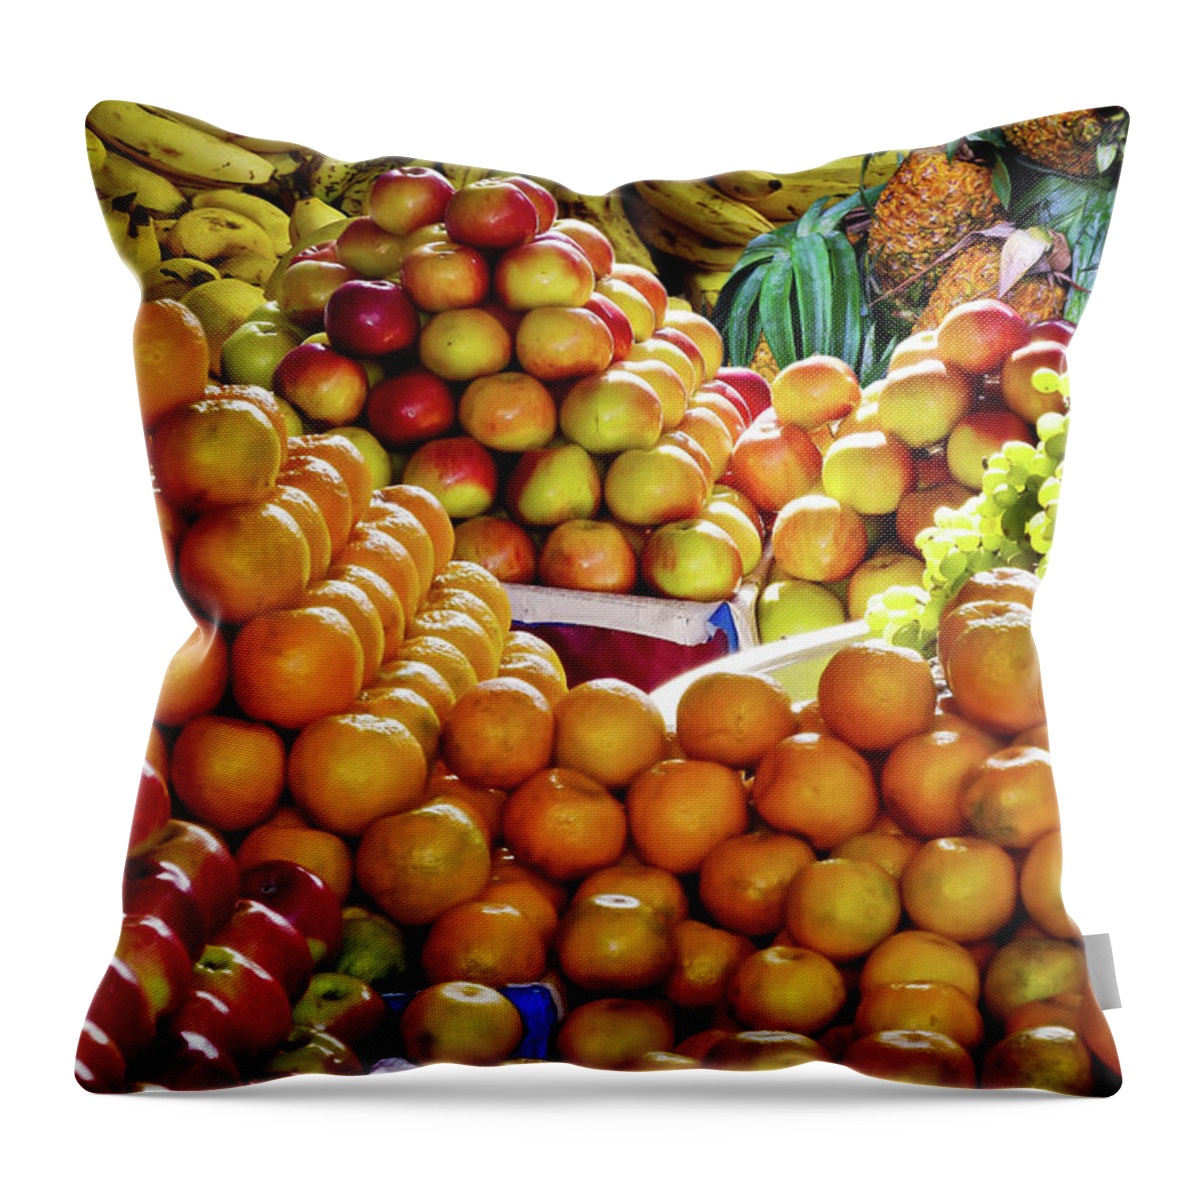 Orange Throw Pillow featuring the photograph Foreign And Local Fruit by By Shibu Bhattacharjee